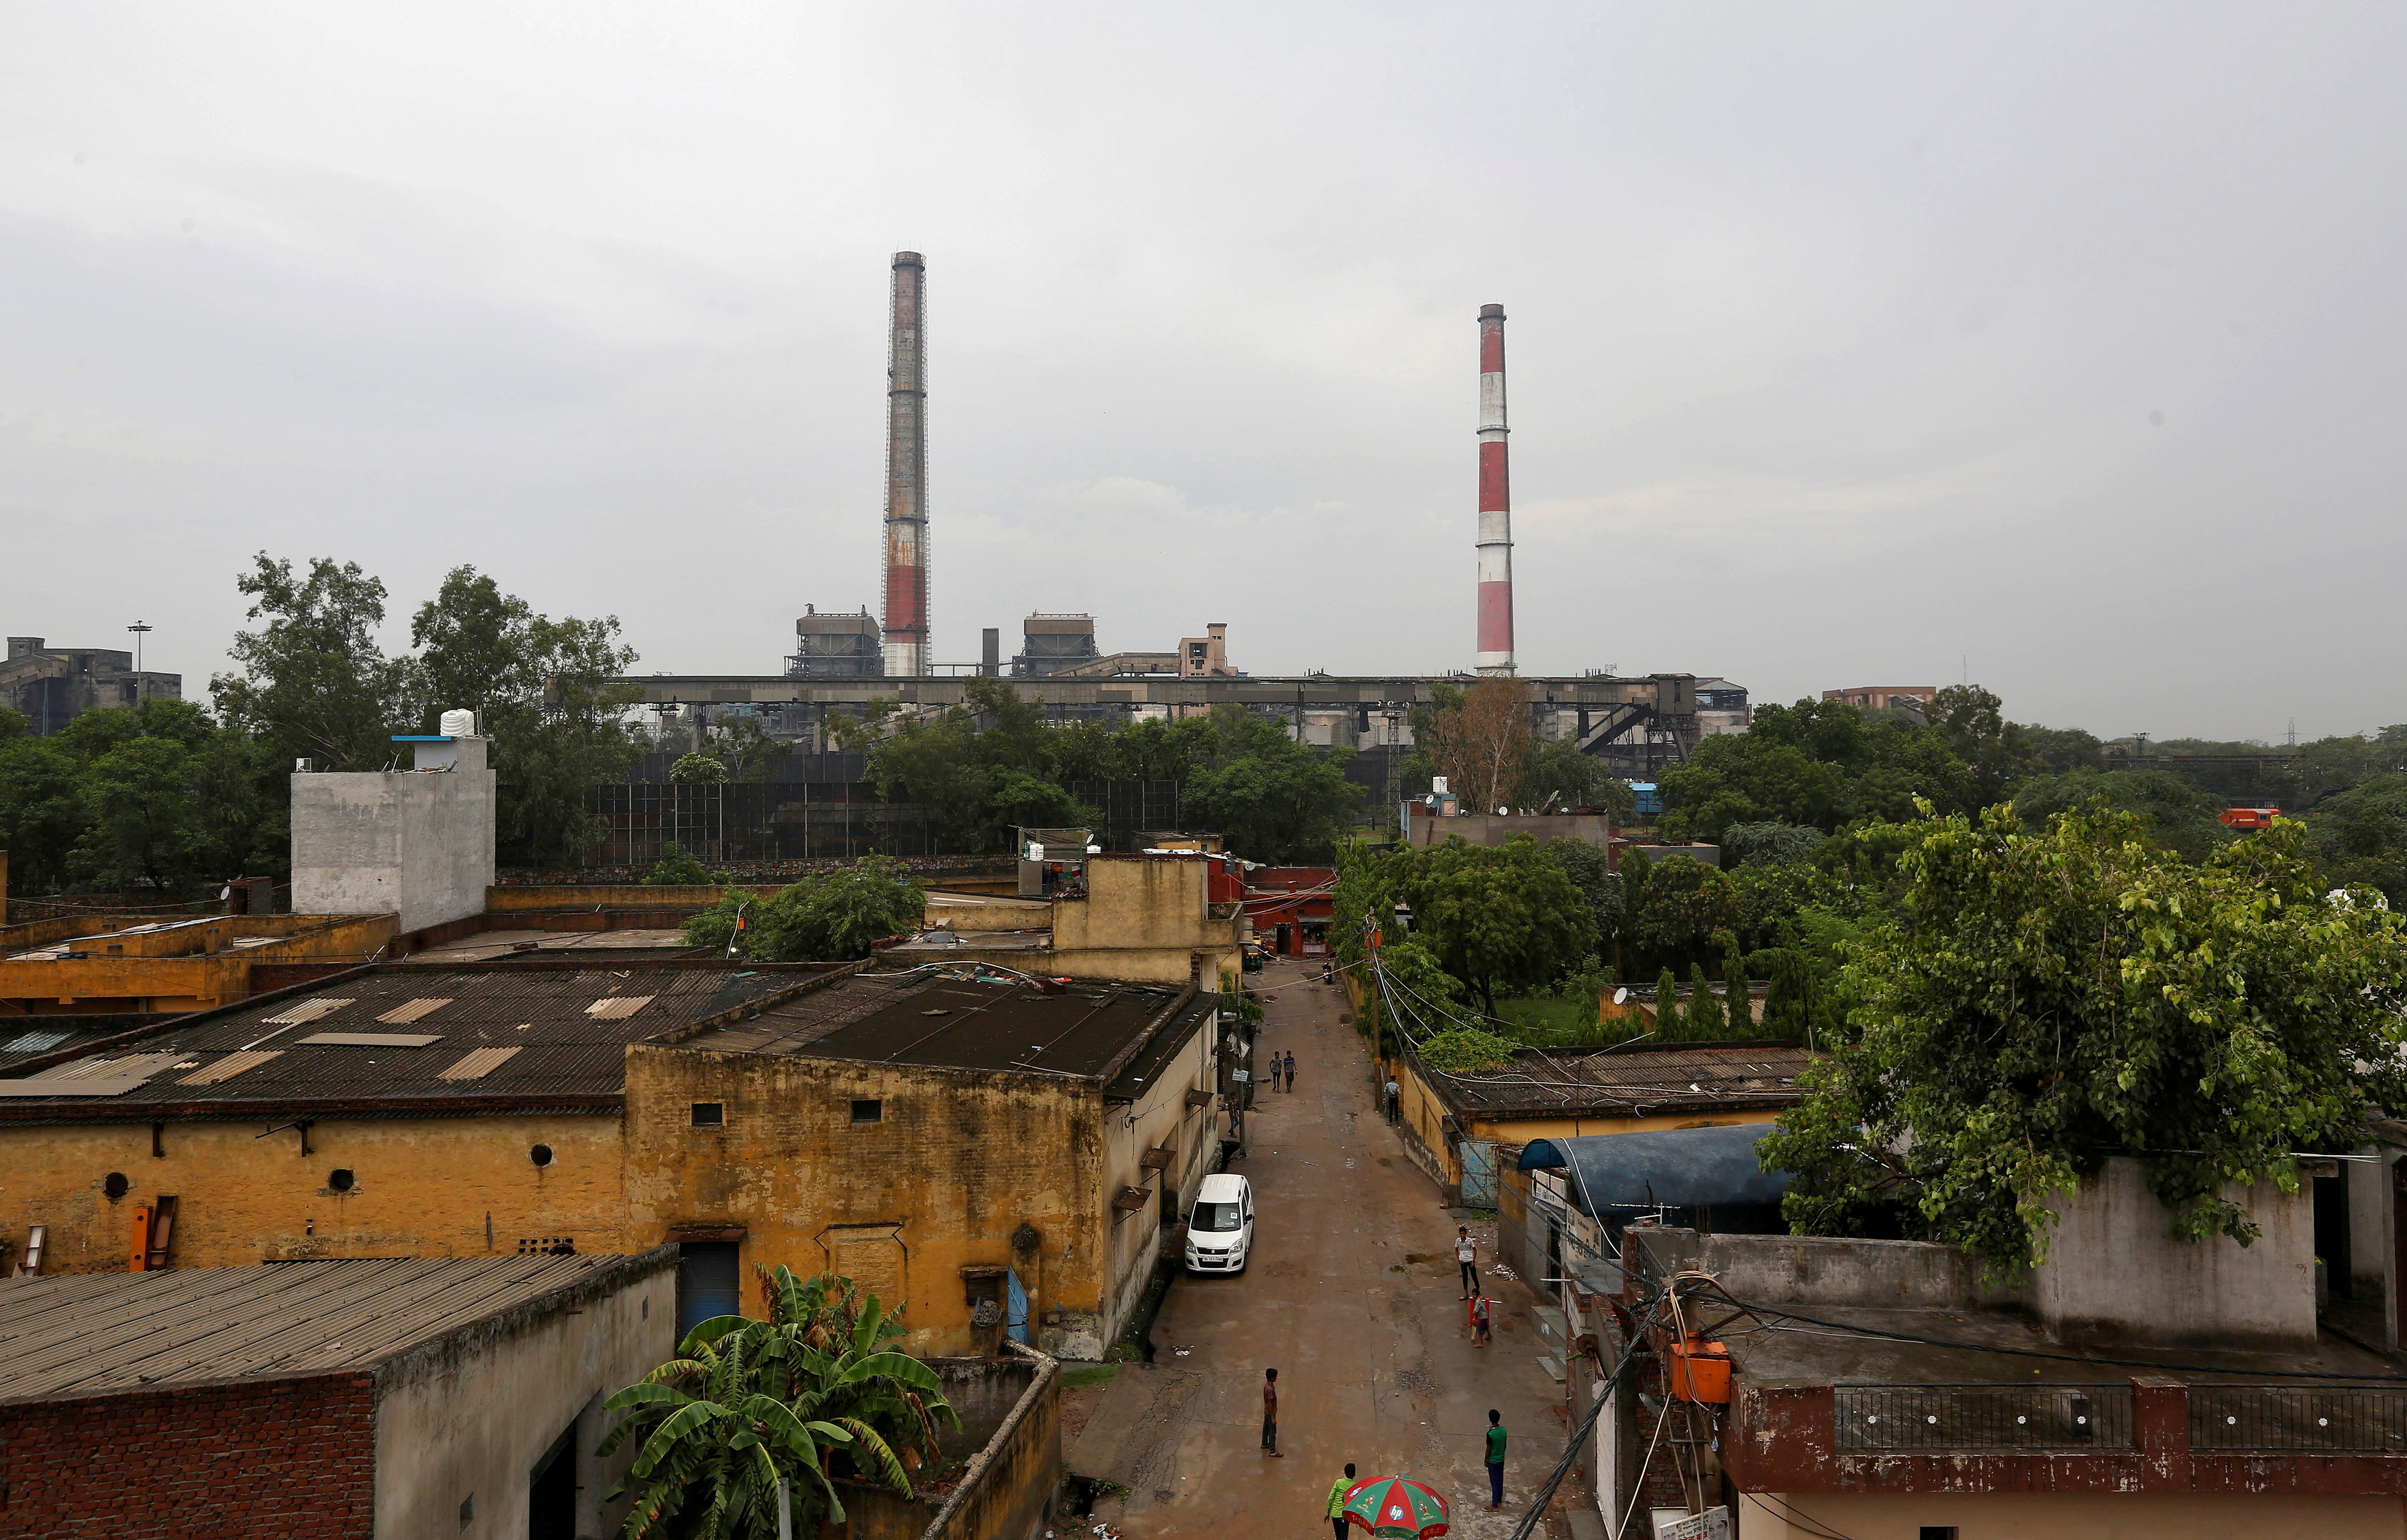 Chimneys of a coal-fired power plant are pictured in New Delhi, India, July 20, 2017. Picture taken July 20, 2017. REUTERS/Adnan Abidi